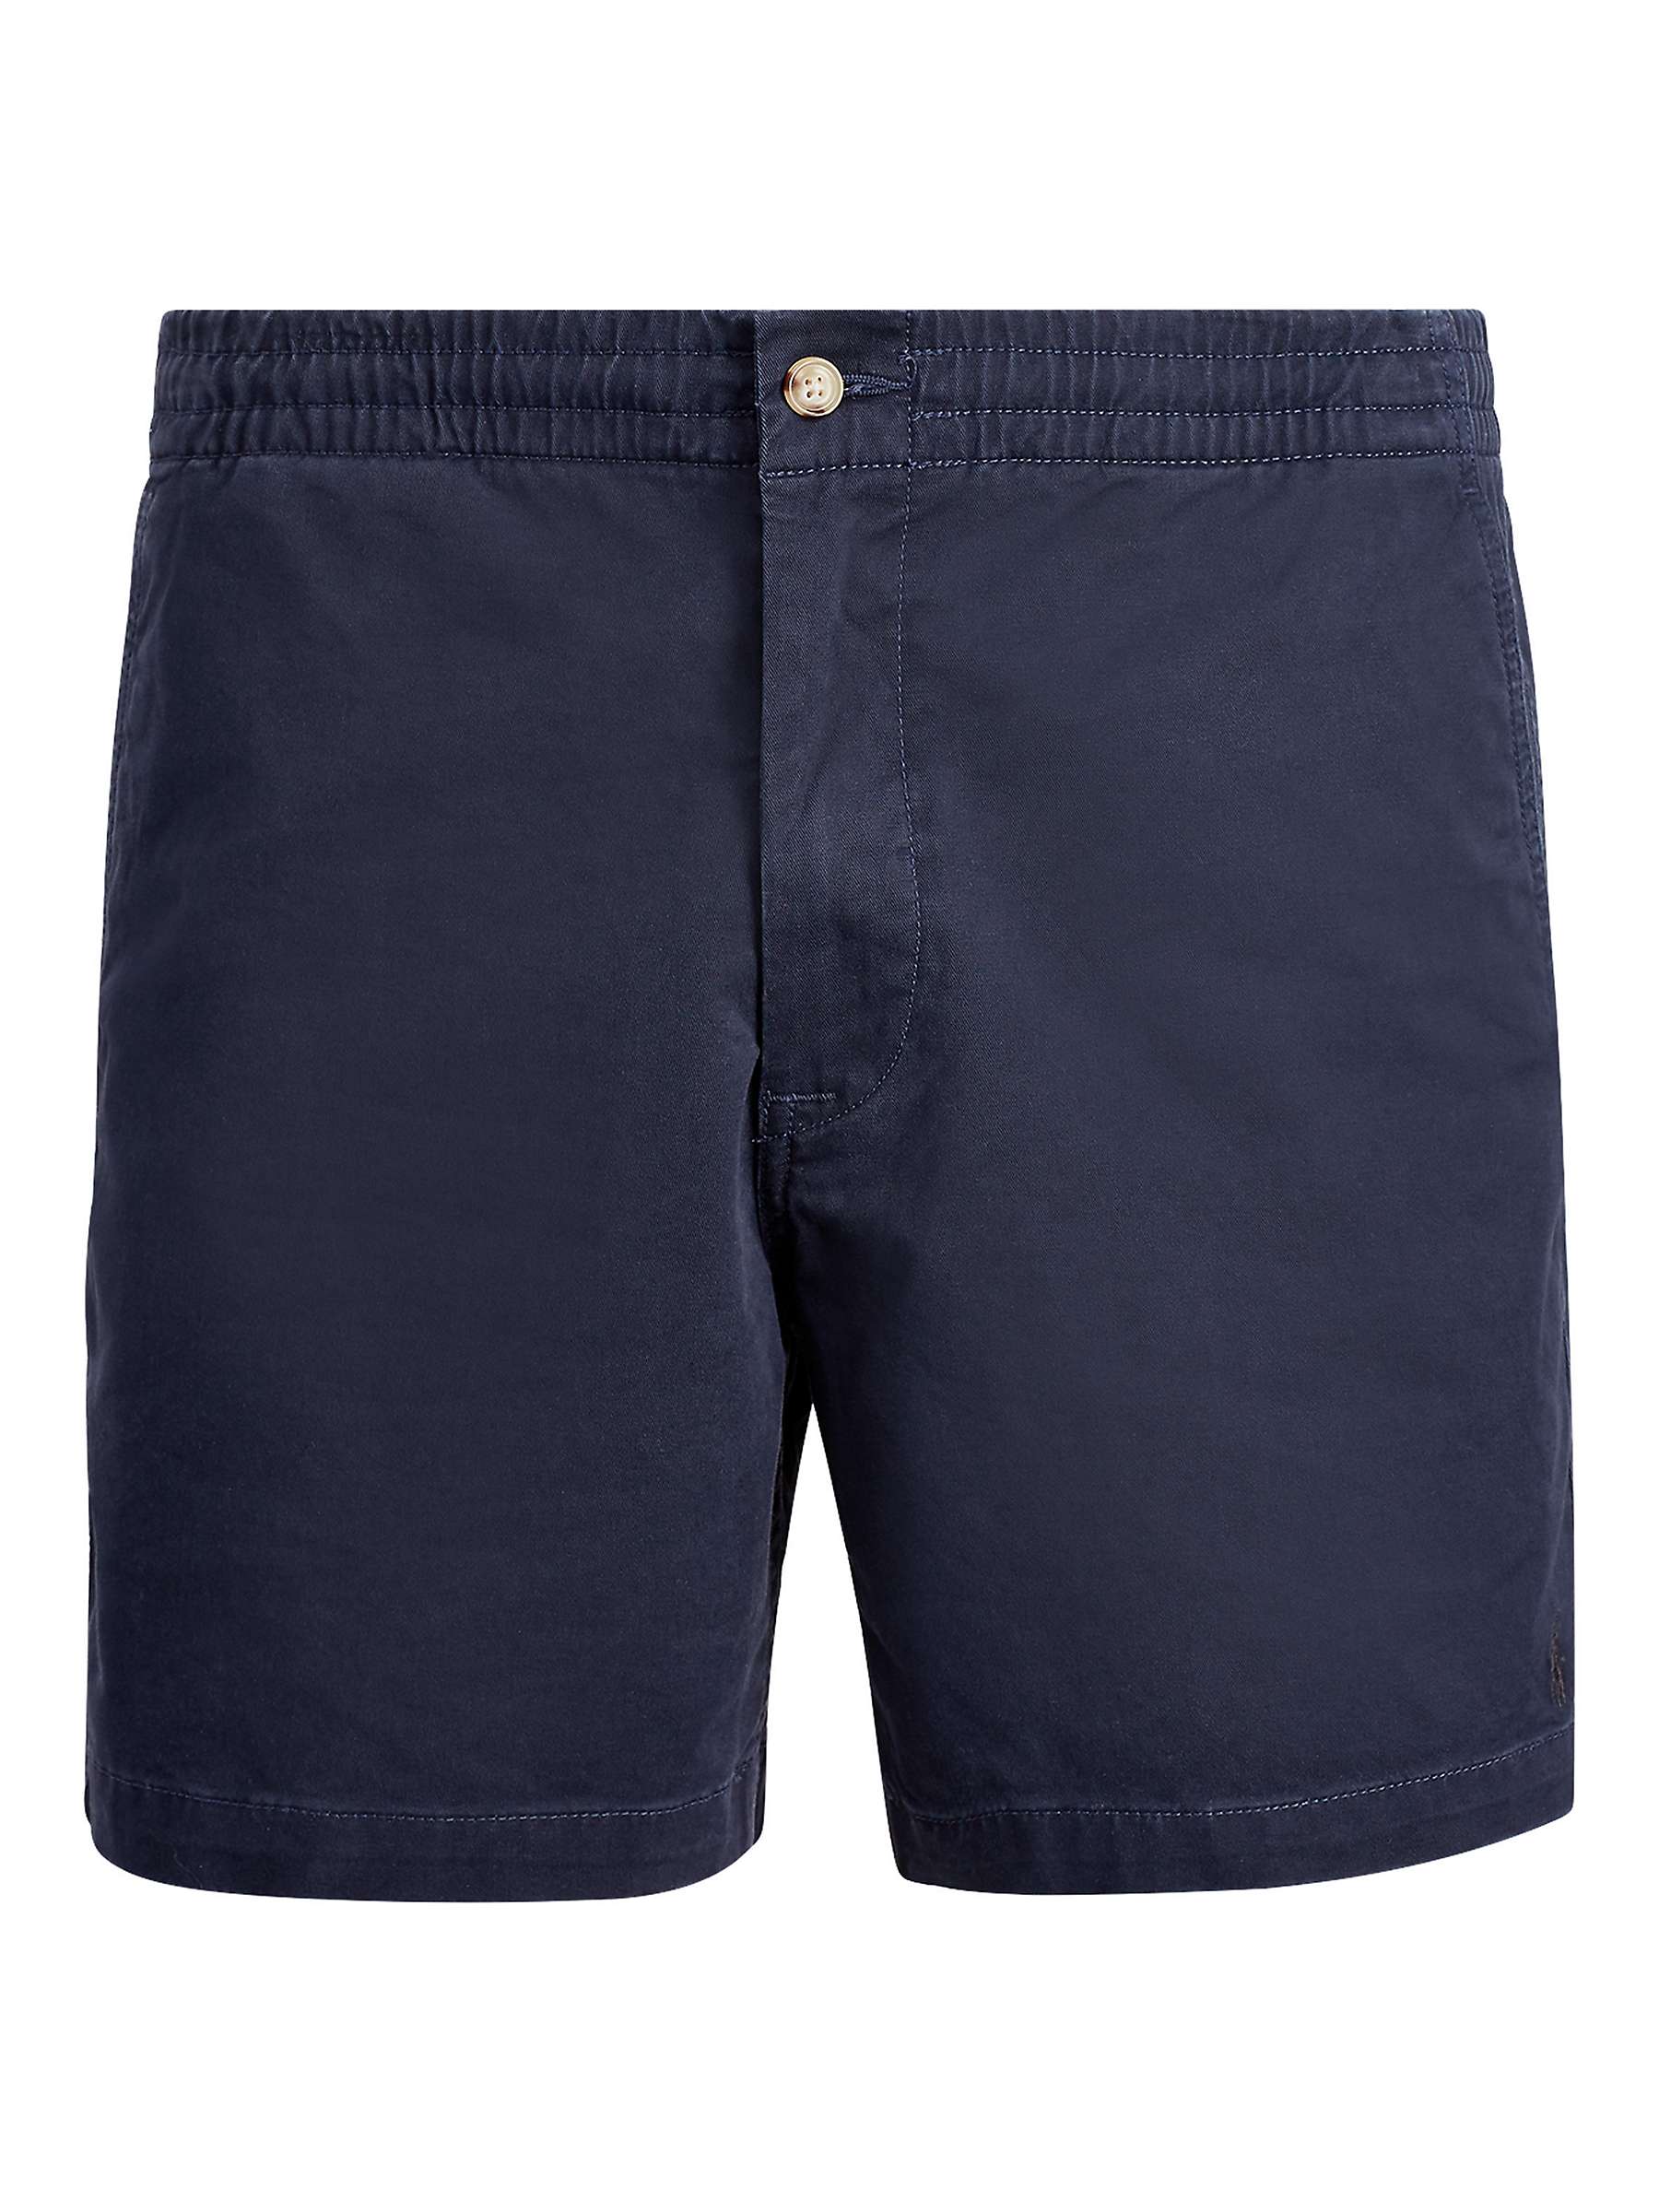 Buy Ralph Lauren Polo Prepseter 6" Stretch Chino Shorts Online at johnlewis.com